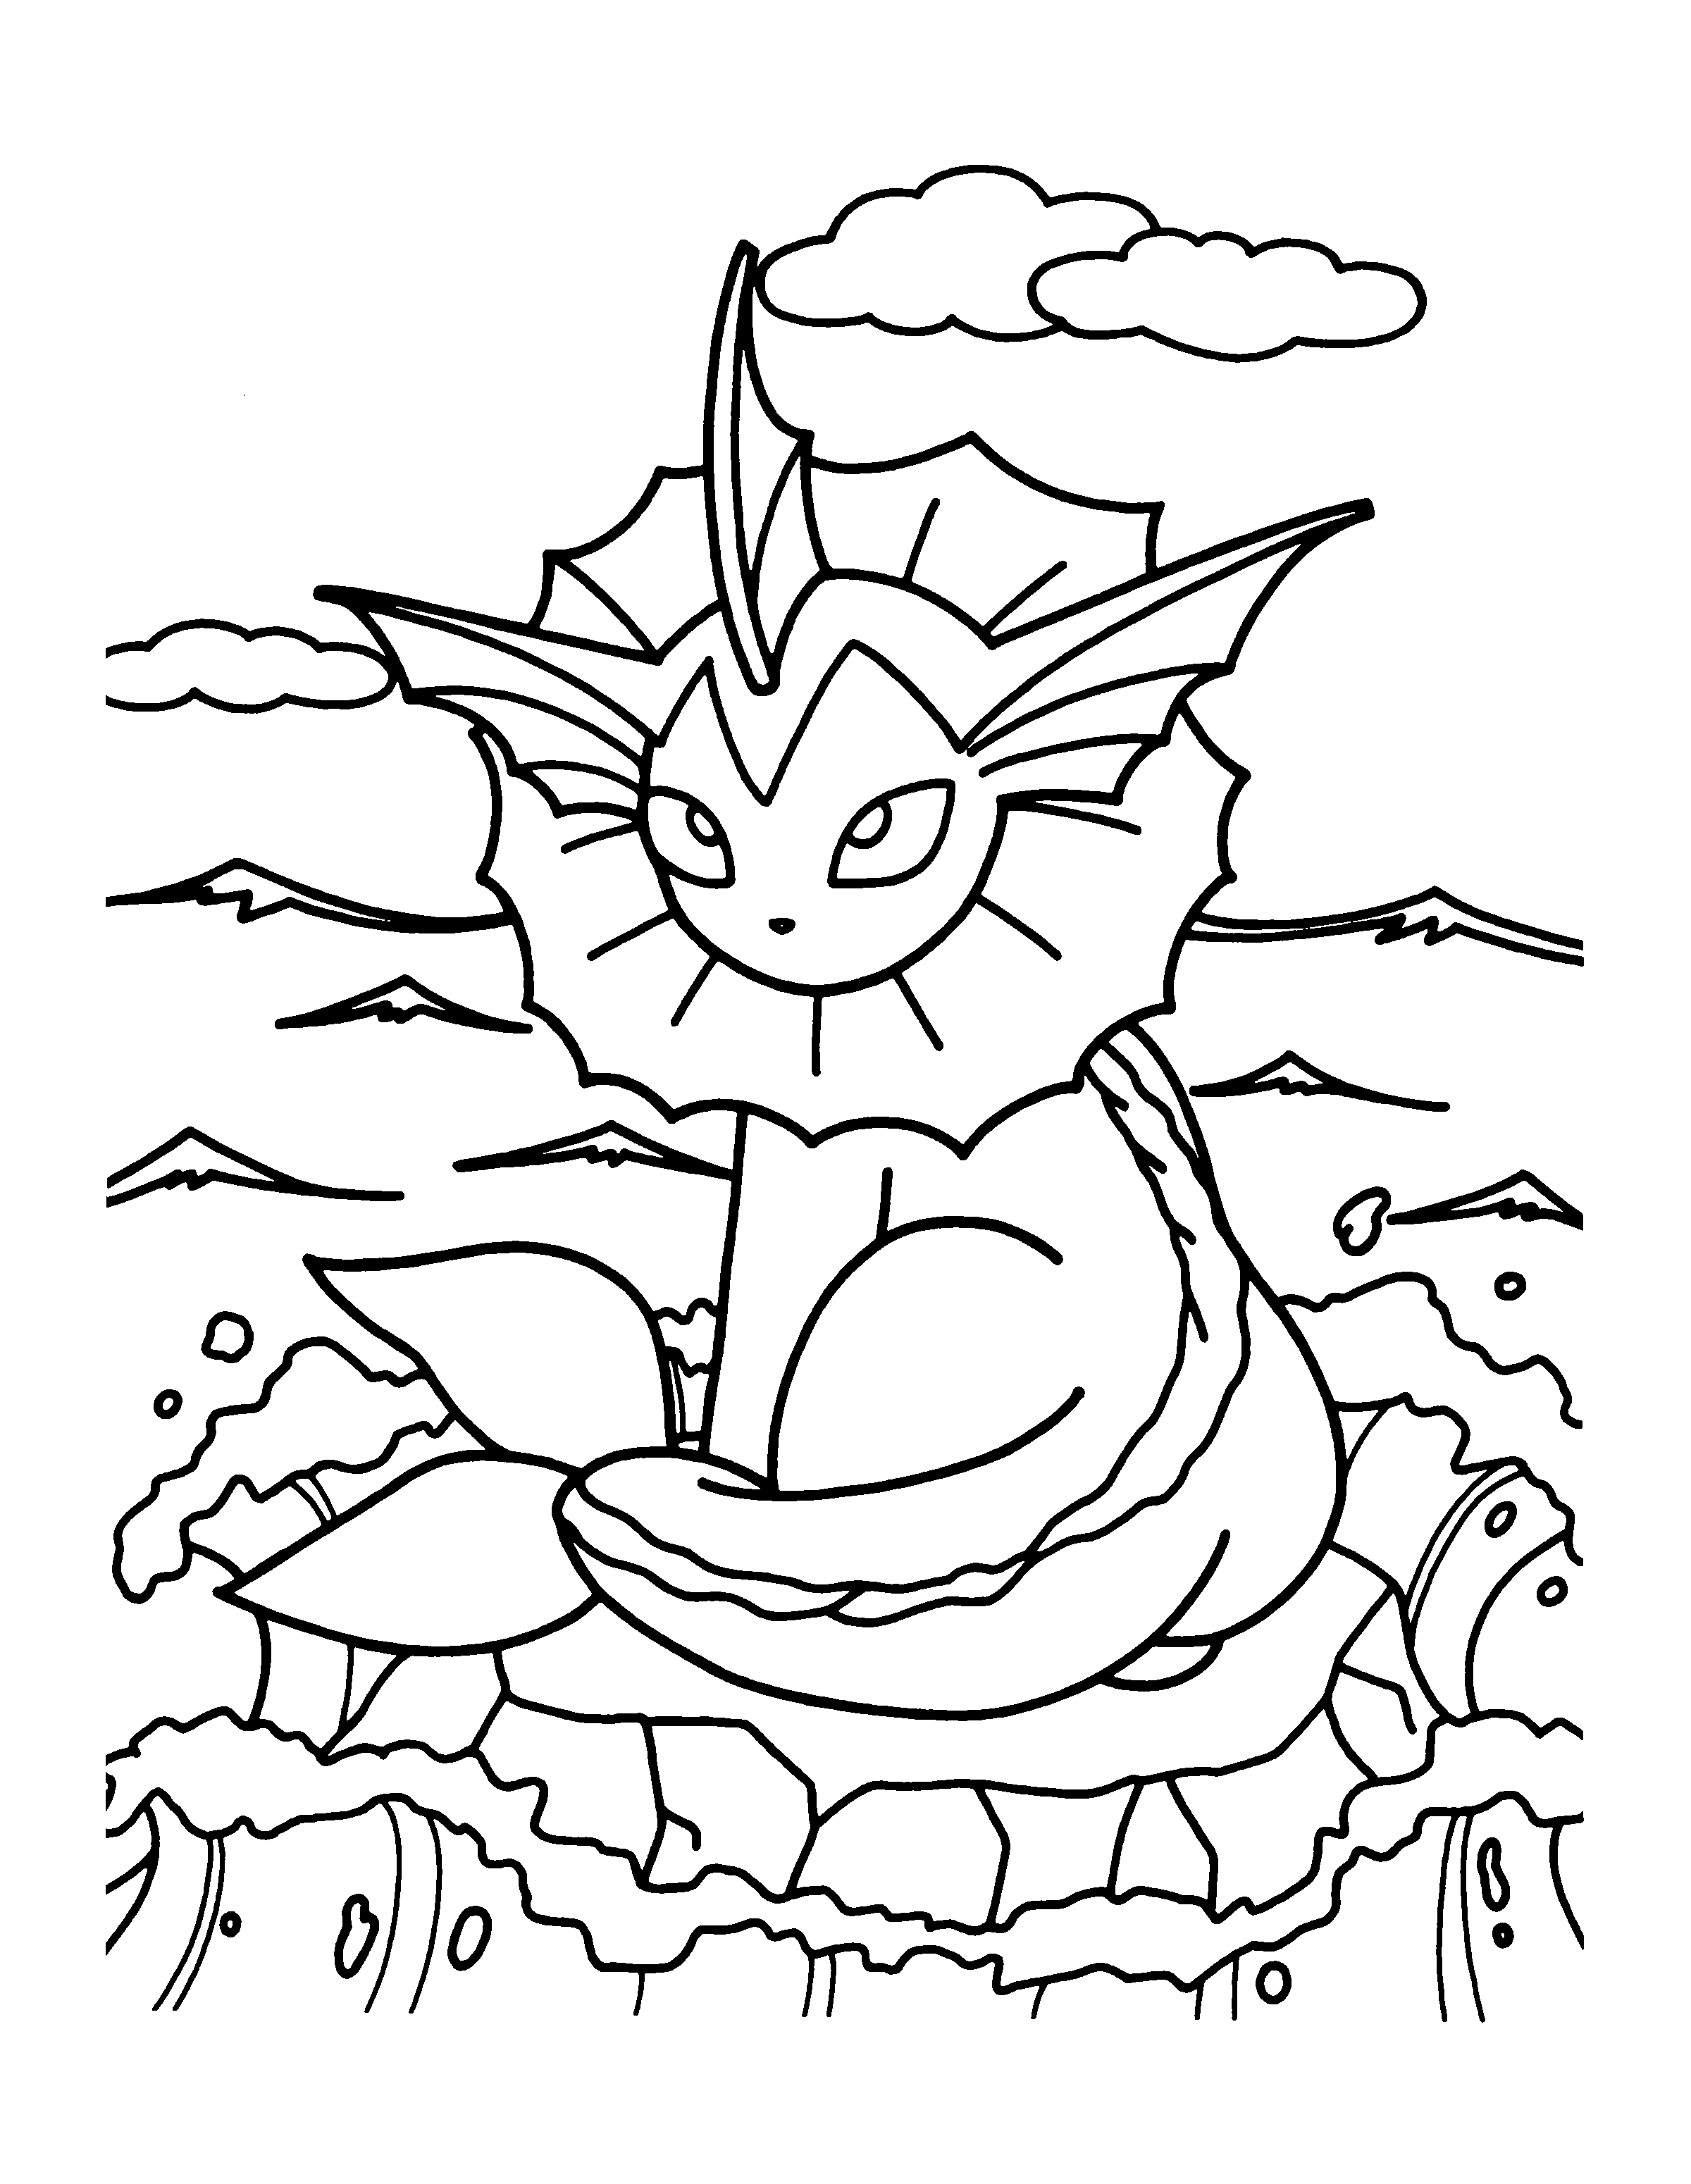 Pokemon Coloring Pages Pdf   Coloring Home